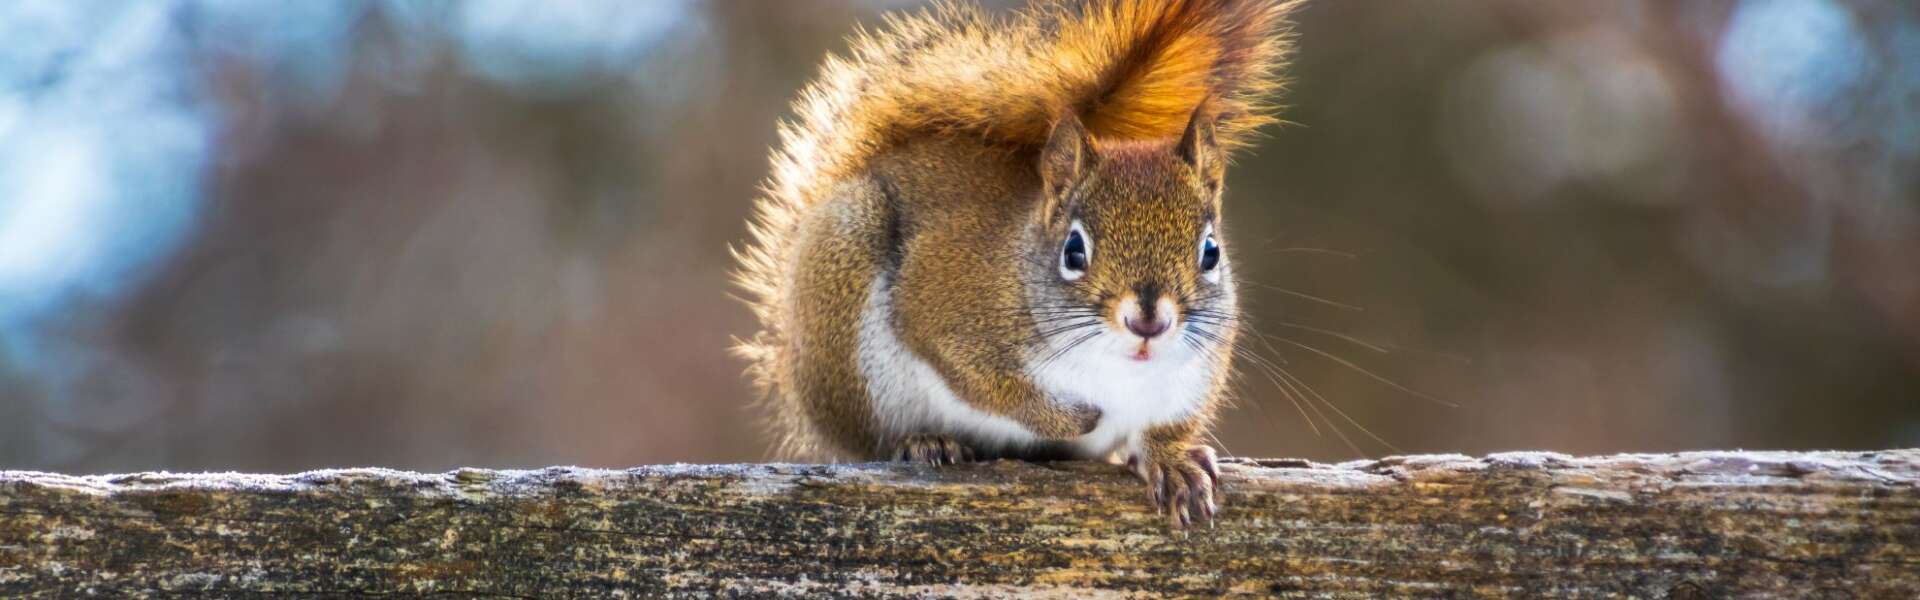 A red squirrel faces the camera while on a wooden fence